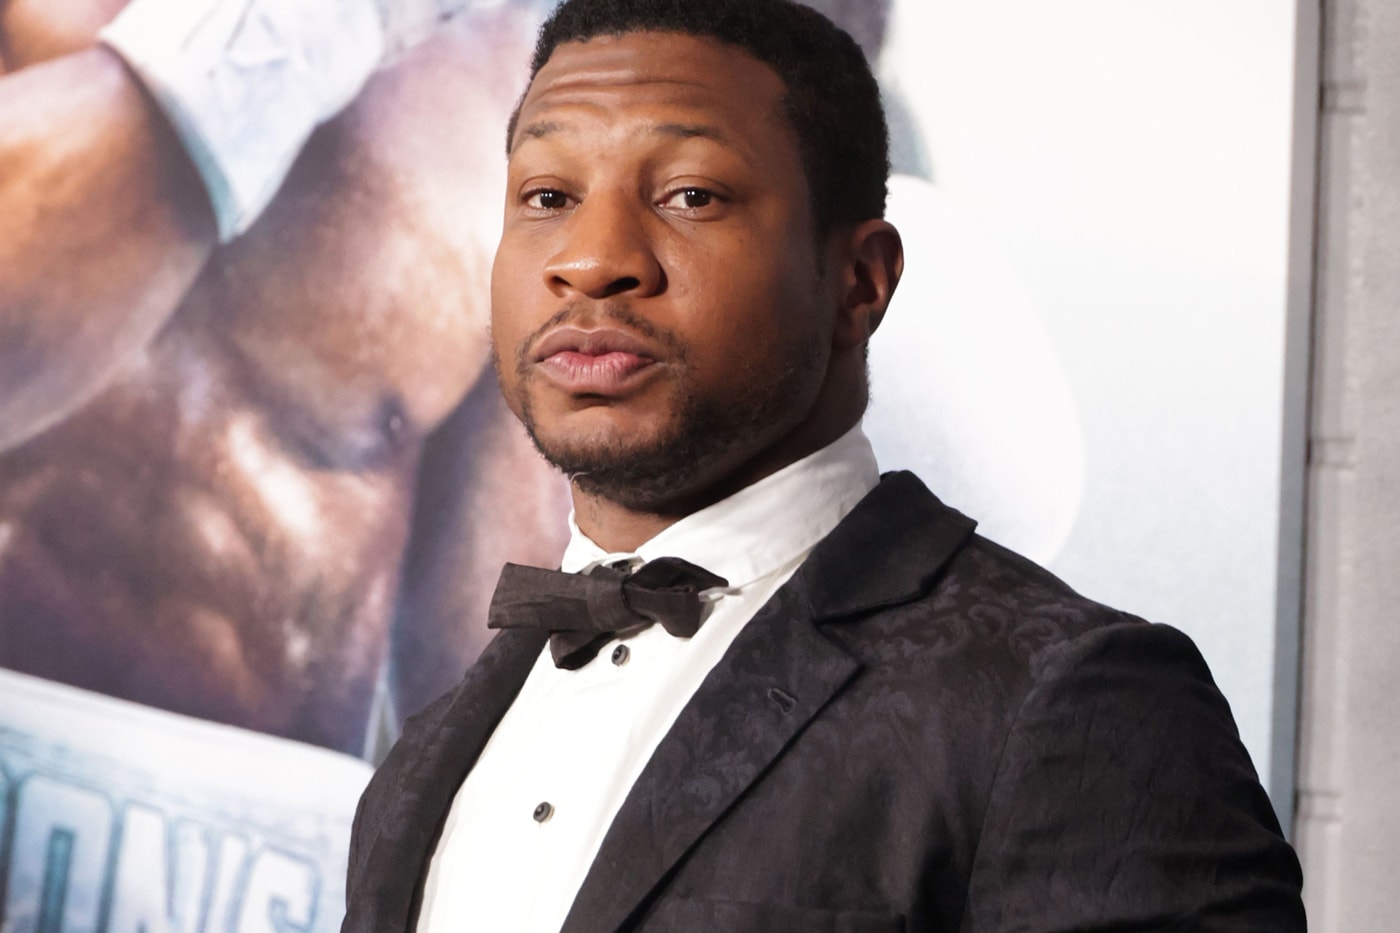 jonathan majors dropped marvel after assault harassment guilty Verdict kang the conqueror